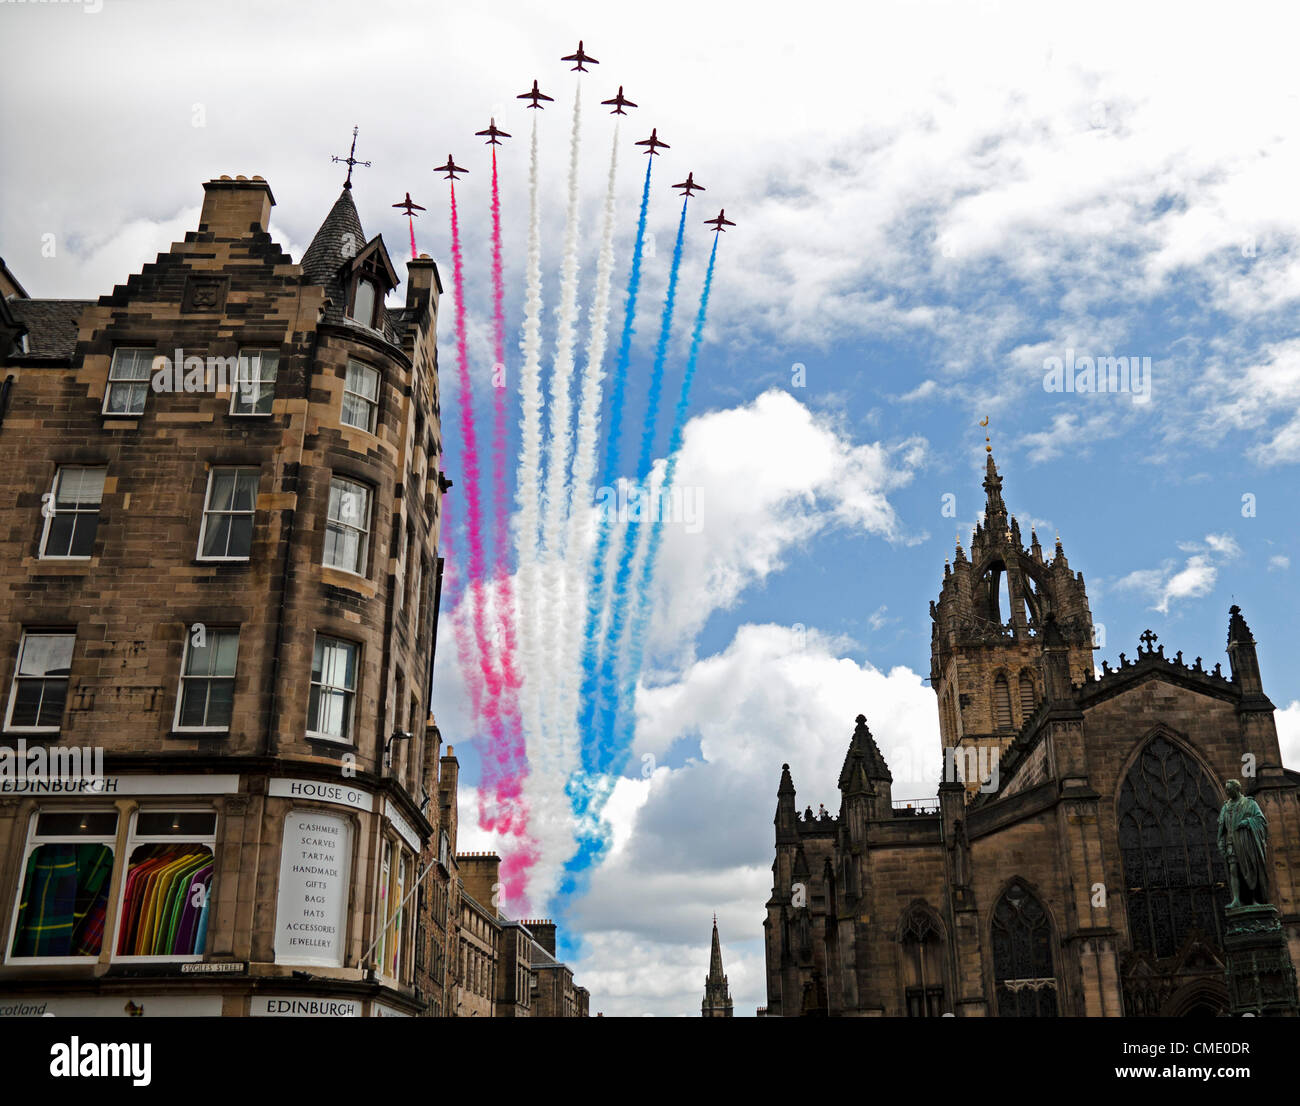 27th July 2012, Edinburgh, Scotland, Red Arrows flypast over city's St Giles Cathedral, Royal Mile at 12.33 pm, to celebrate opening day of Olympics 2012. Stock Photo